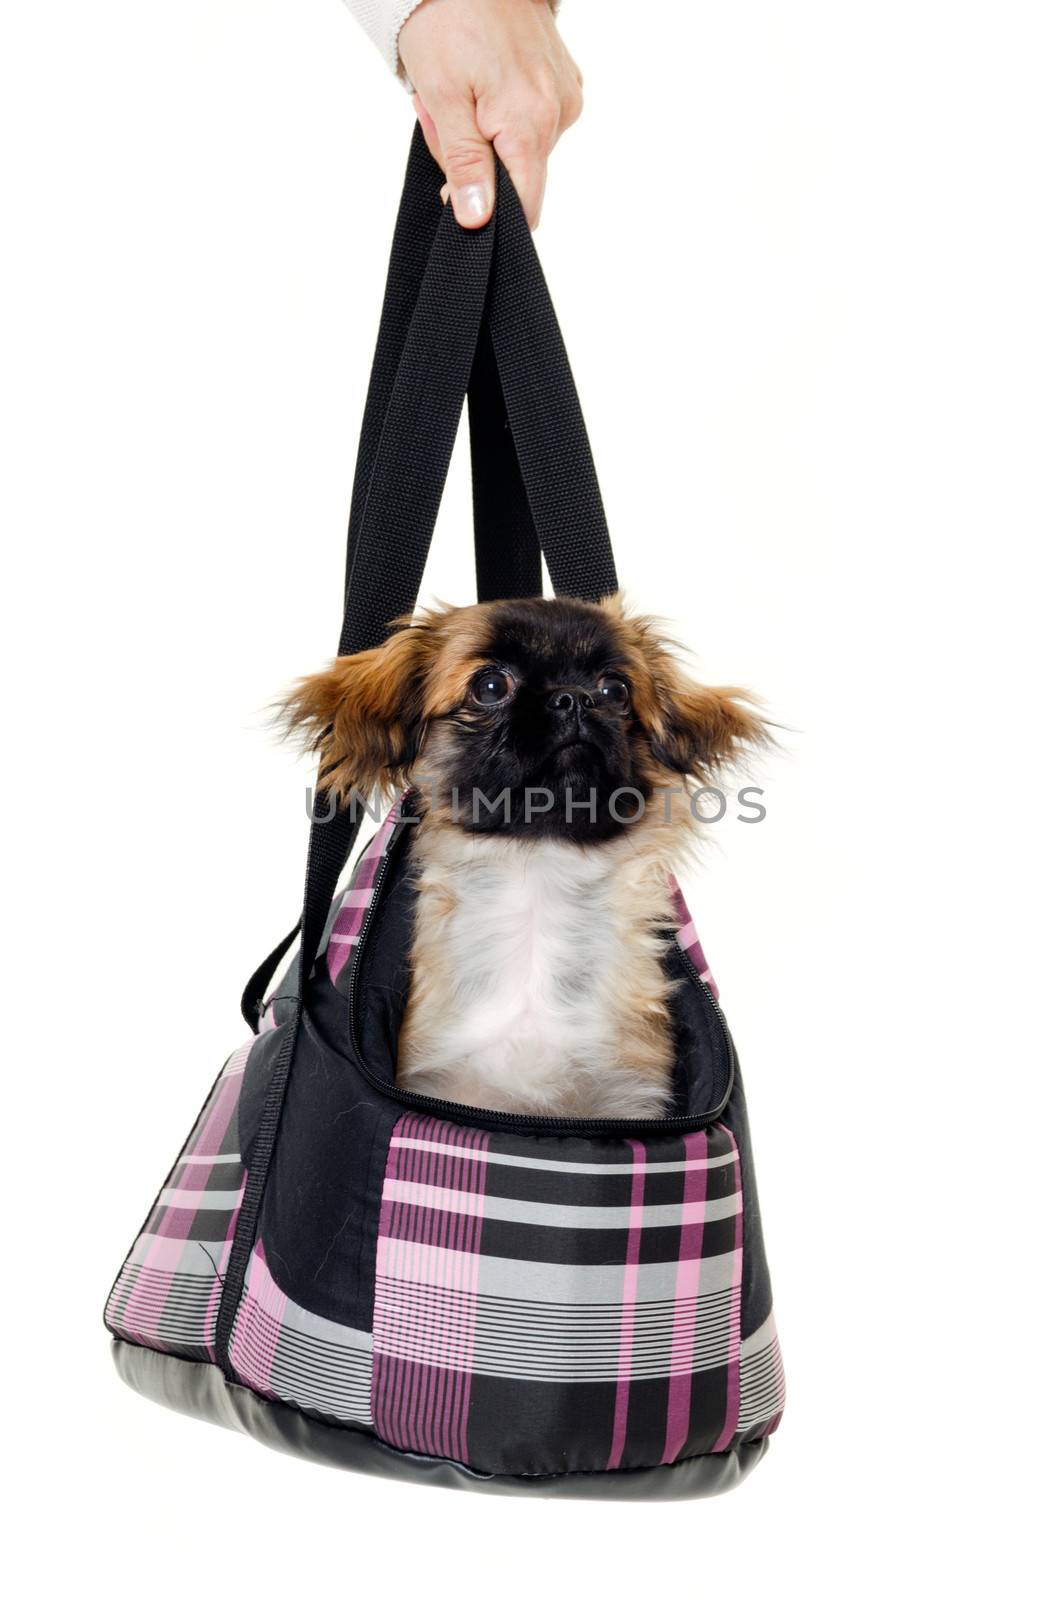 A sweet puppy in transportation bag. Taken on a white background